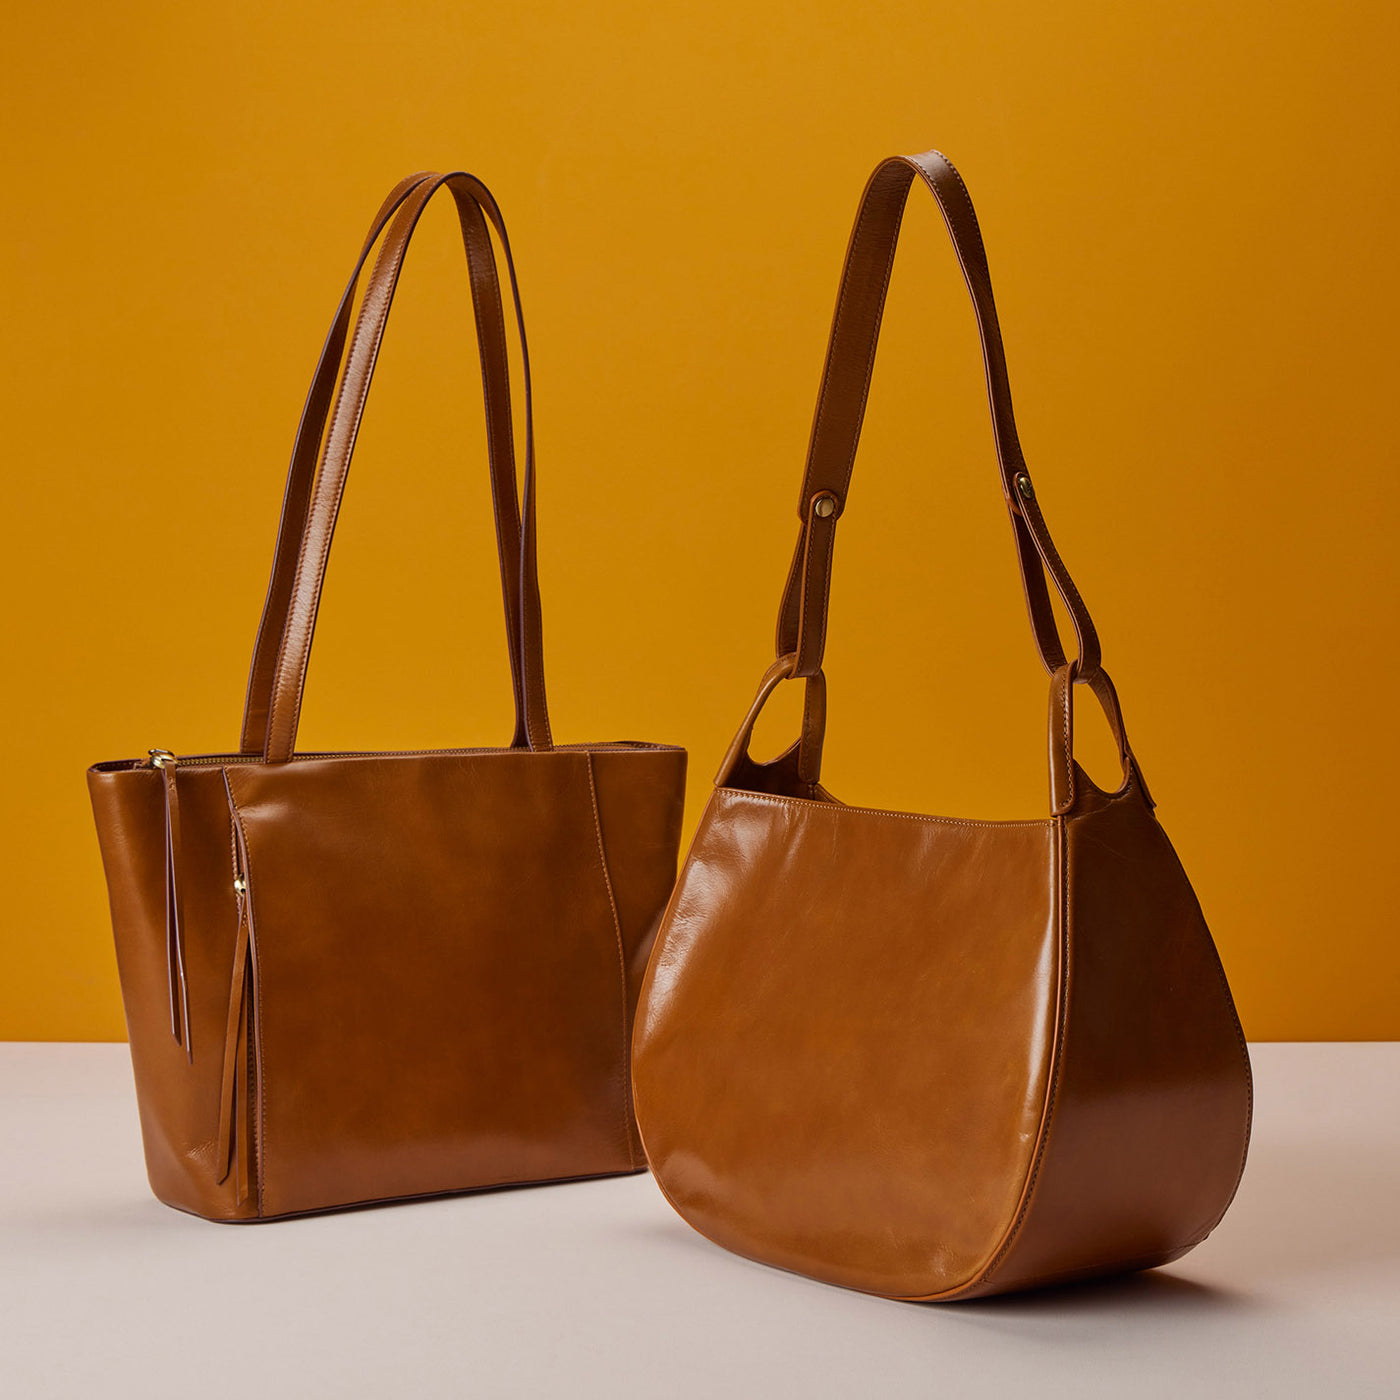 Haven Tote in Polished Leather - Truffle